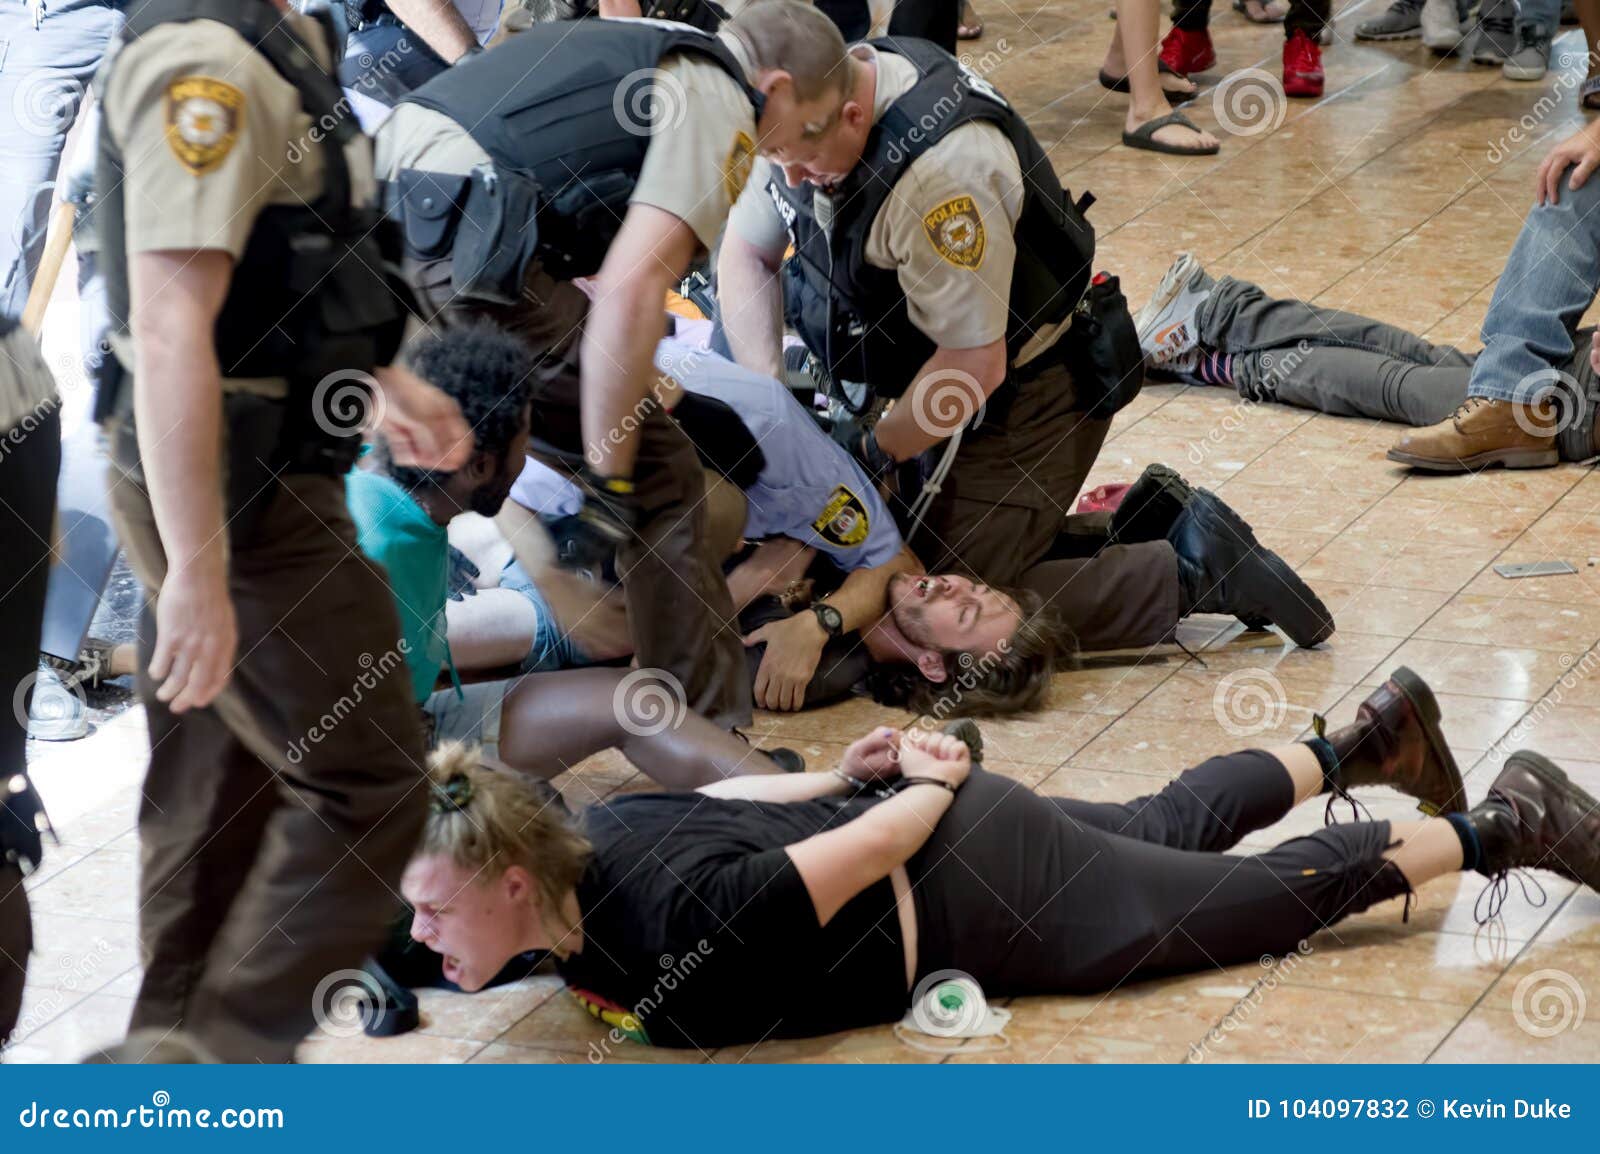 Protesters being arrested editorial photography. Image of shooting - 104097832